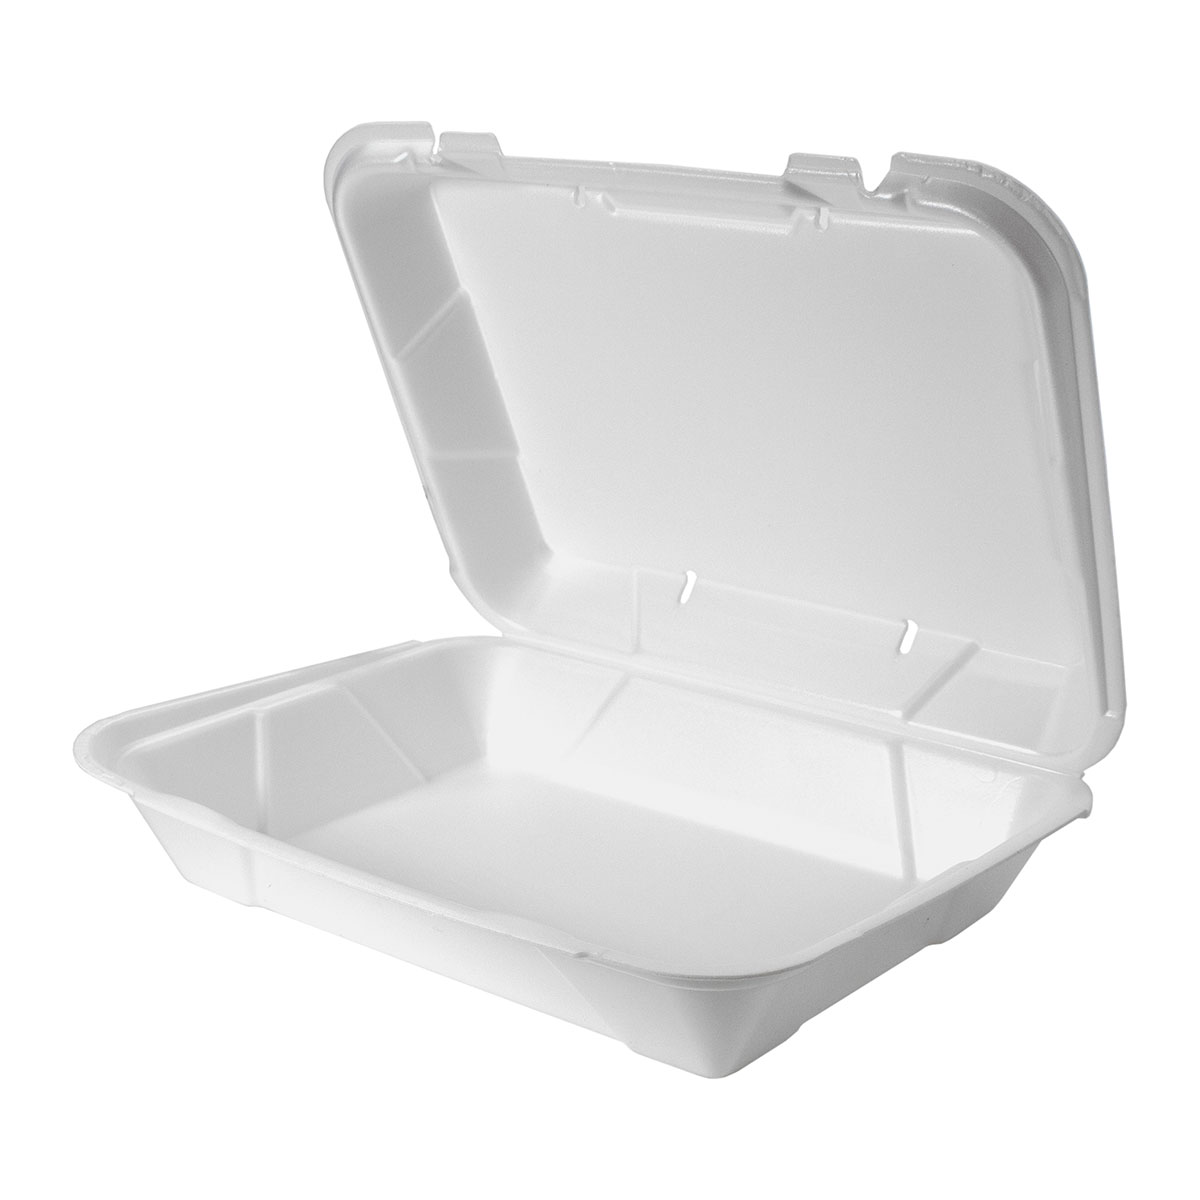 White 13" x 9" Snap It Lock Vented Hinged Rectangle Container